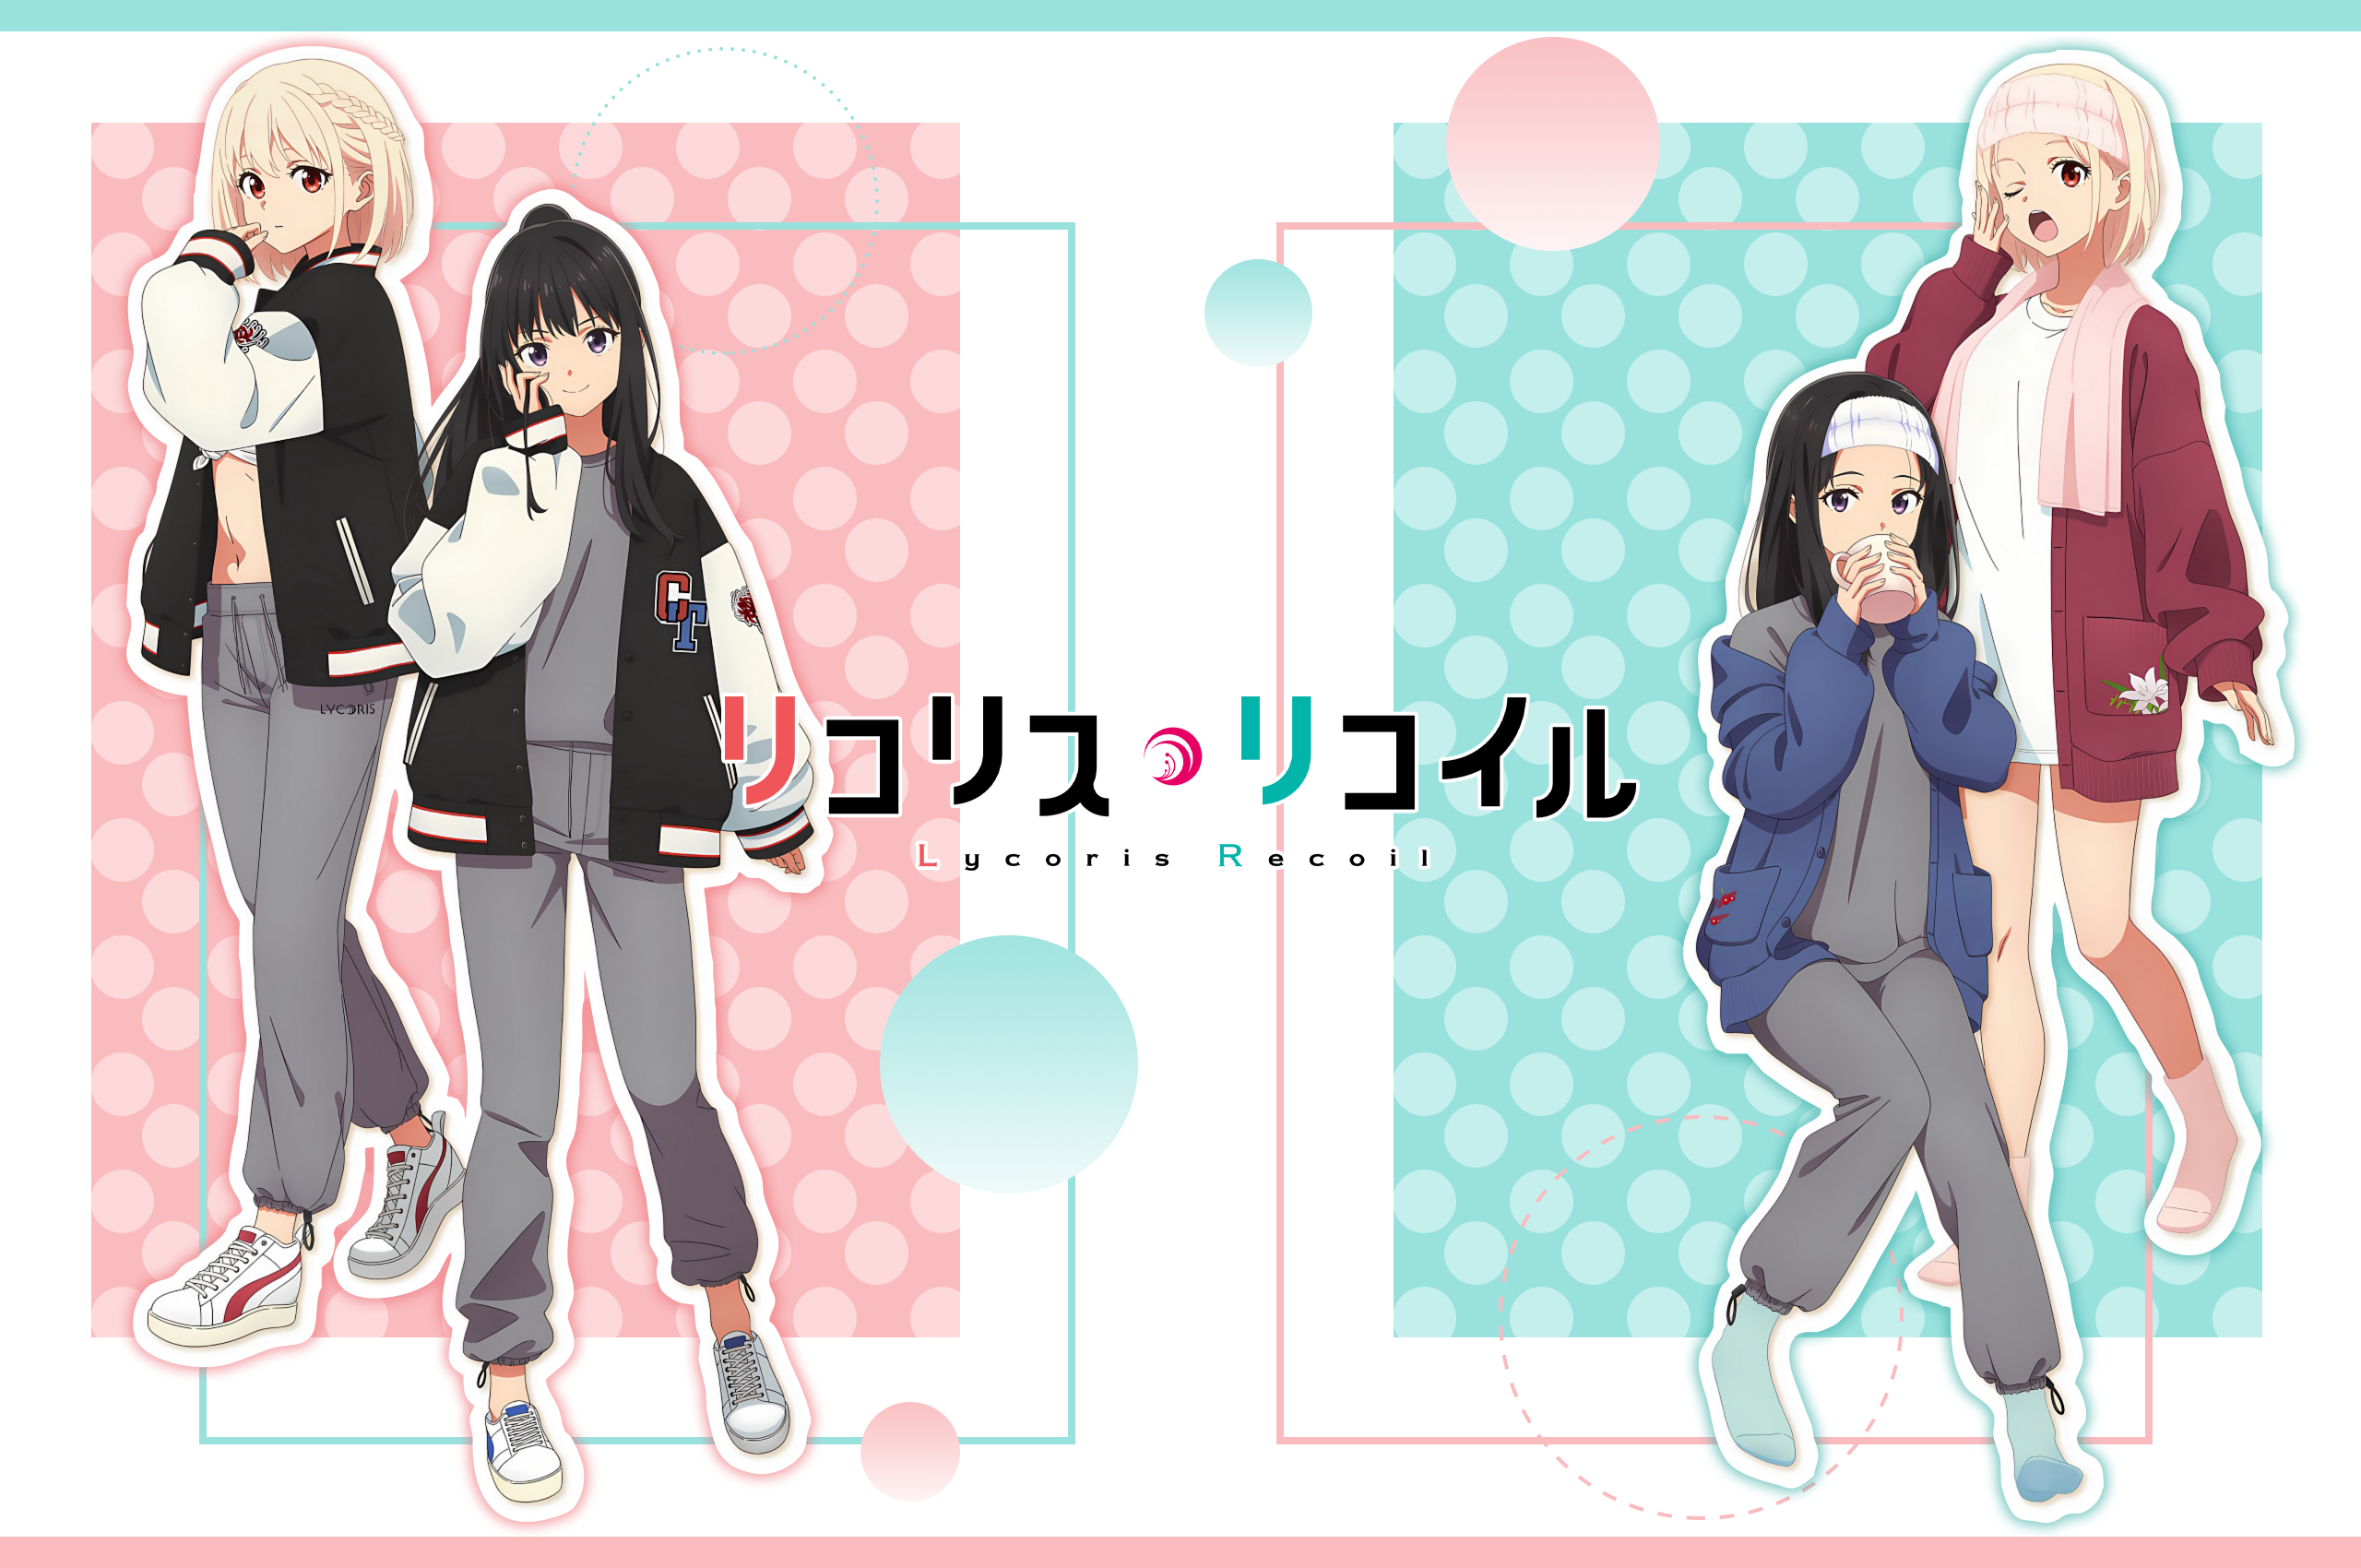 Anime 2560x1700 anime anime girls Lycoris Recoil Inoue Takina Nishikigi Chisato blonde looking at viewer jacket black hair closed mouth open mouth one eye closed yawning towel cup open jacket standing short hair long hair touching face ponytail french braids smiling Japanese bright title